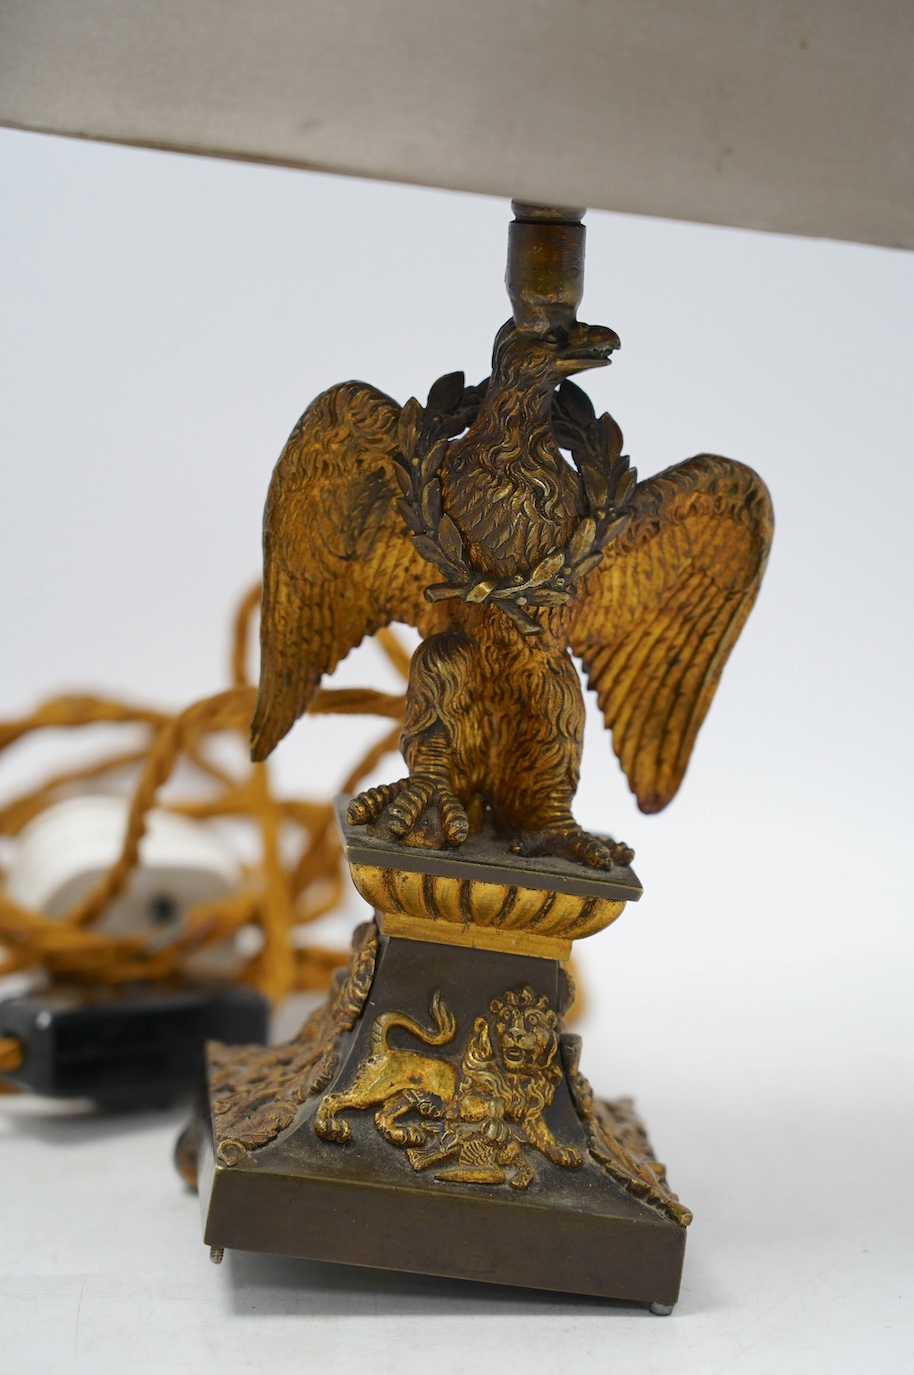 An ormolu table lamp in the form of an eagle with a laurel wreath around its neck, fitted with a grey shade, 39cm high overall. Condition poor to fair, three feet missing to lamp